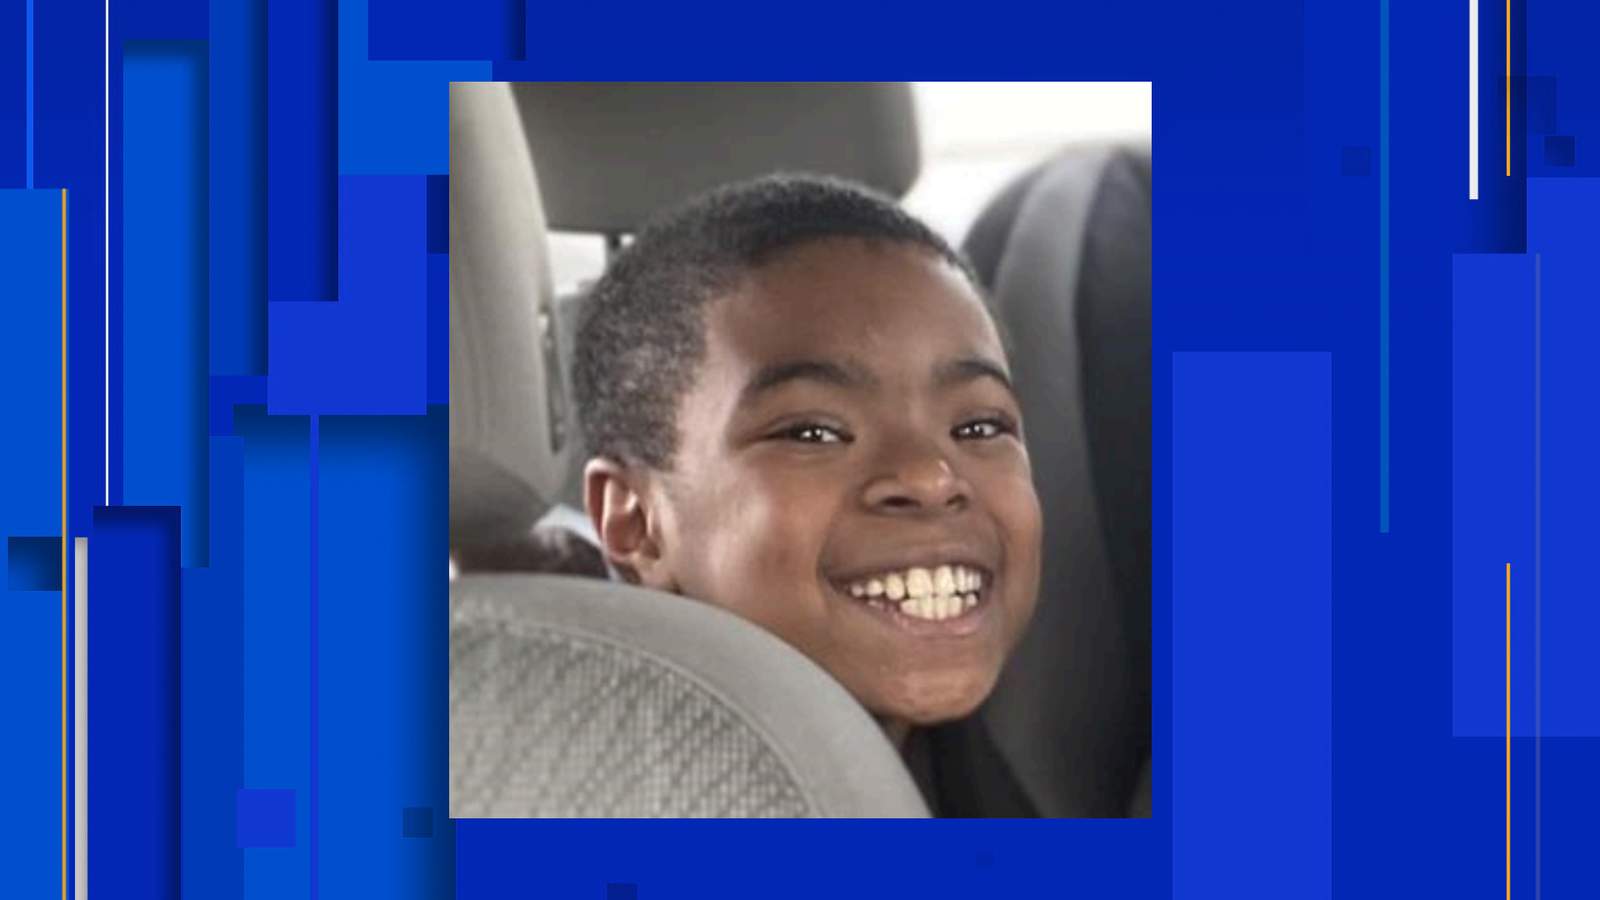 UPDATE: Missing 9-year-old boy in San Antonio located, police say